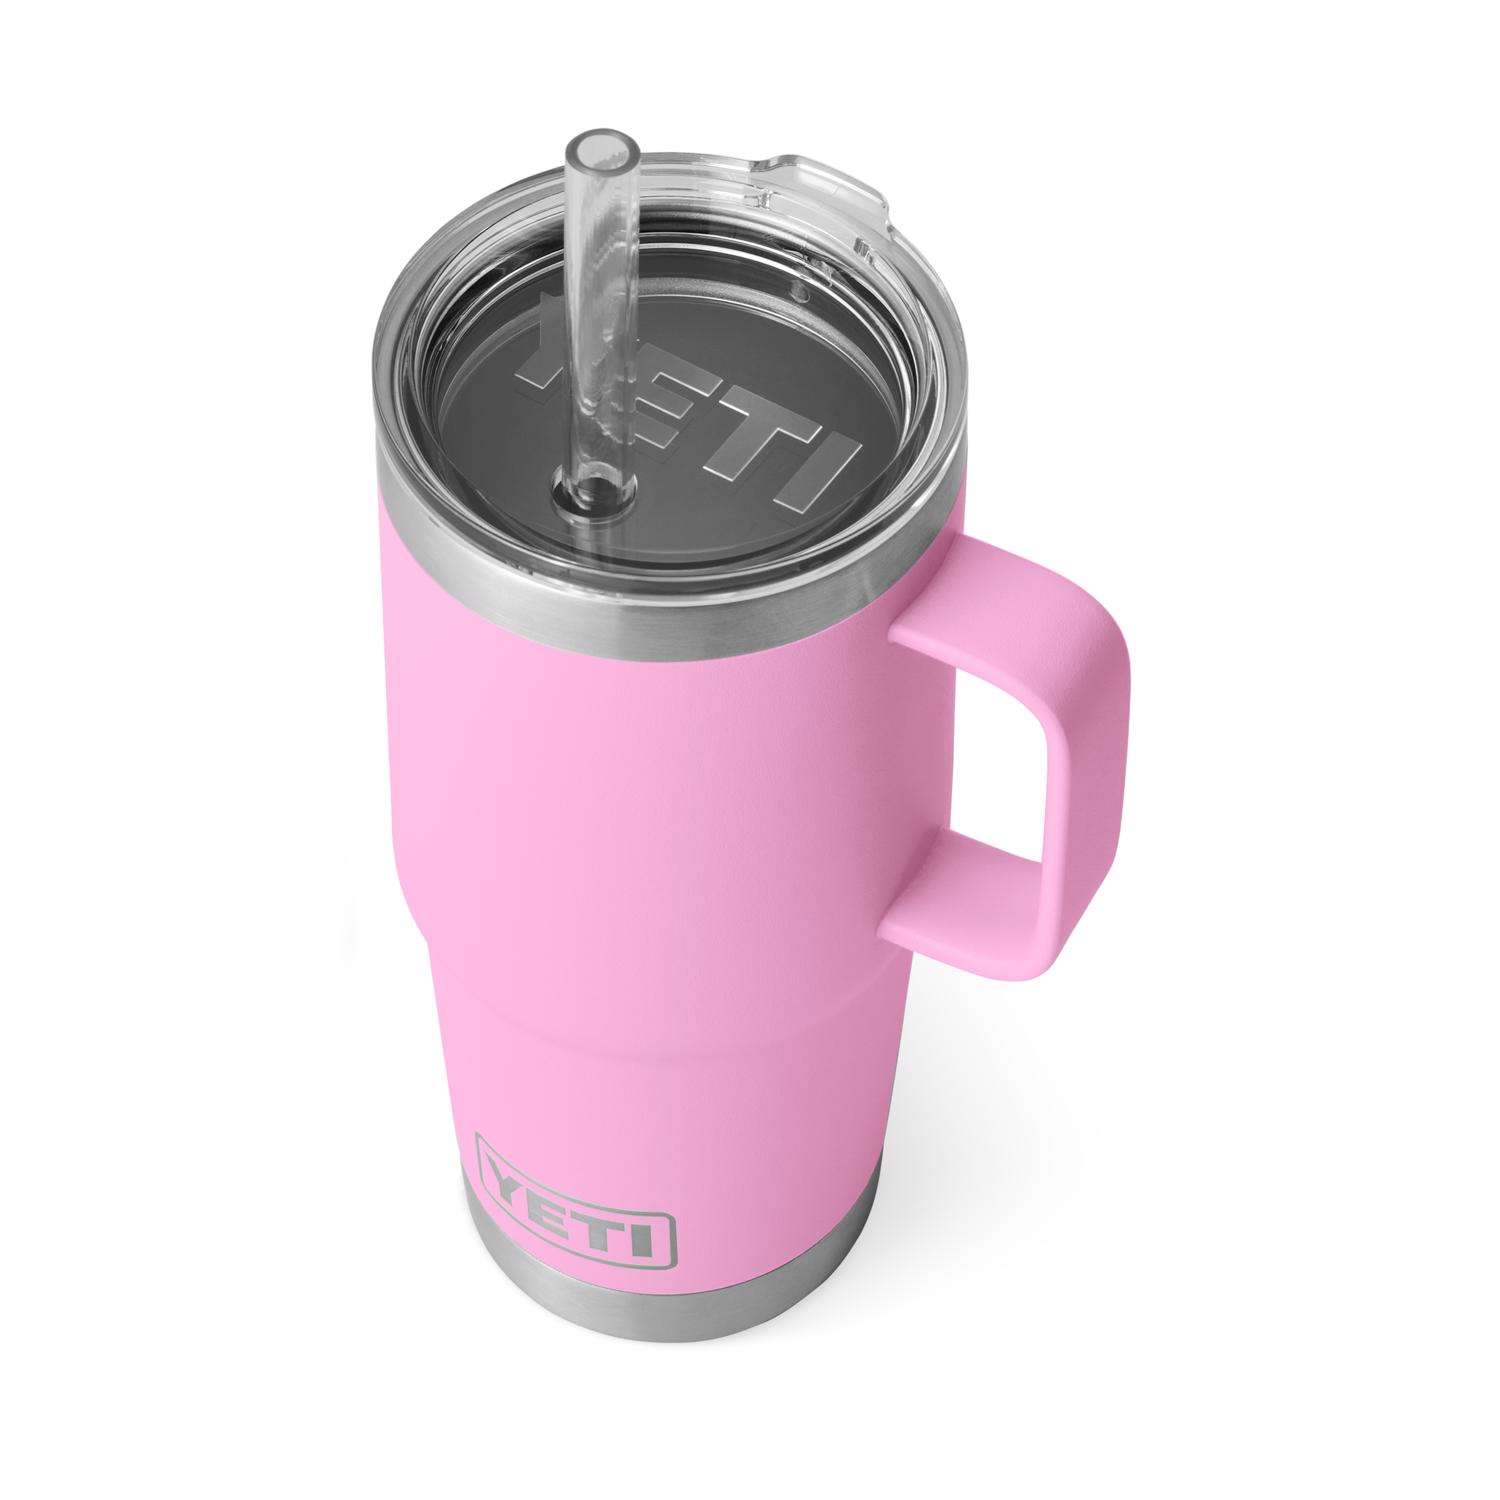 YETI Rambler 26-fl oz Stainless Steel Cup with Straw Lid in the Water  Bottles & Mugs department at